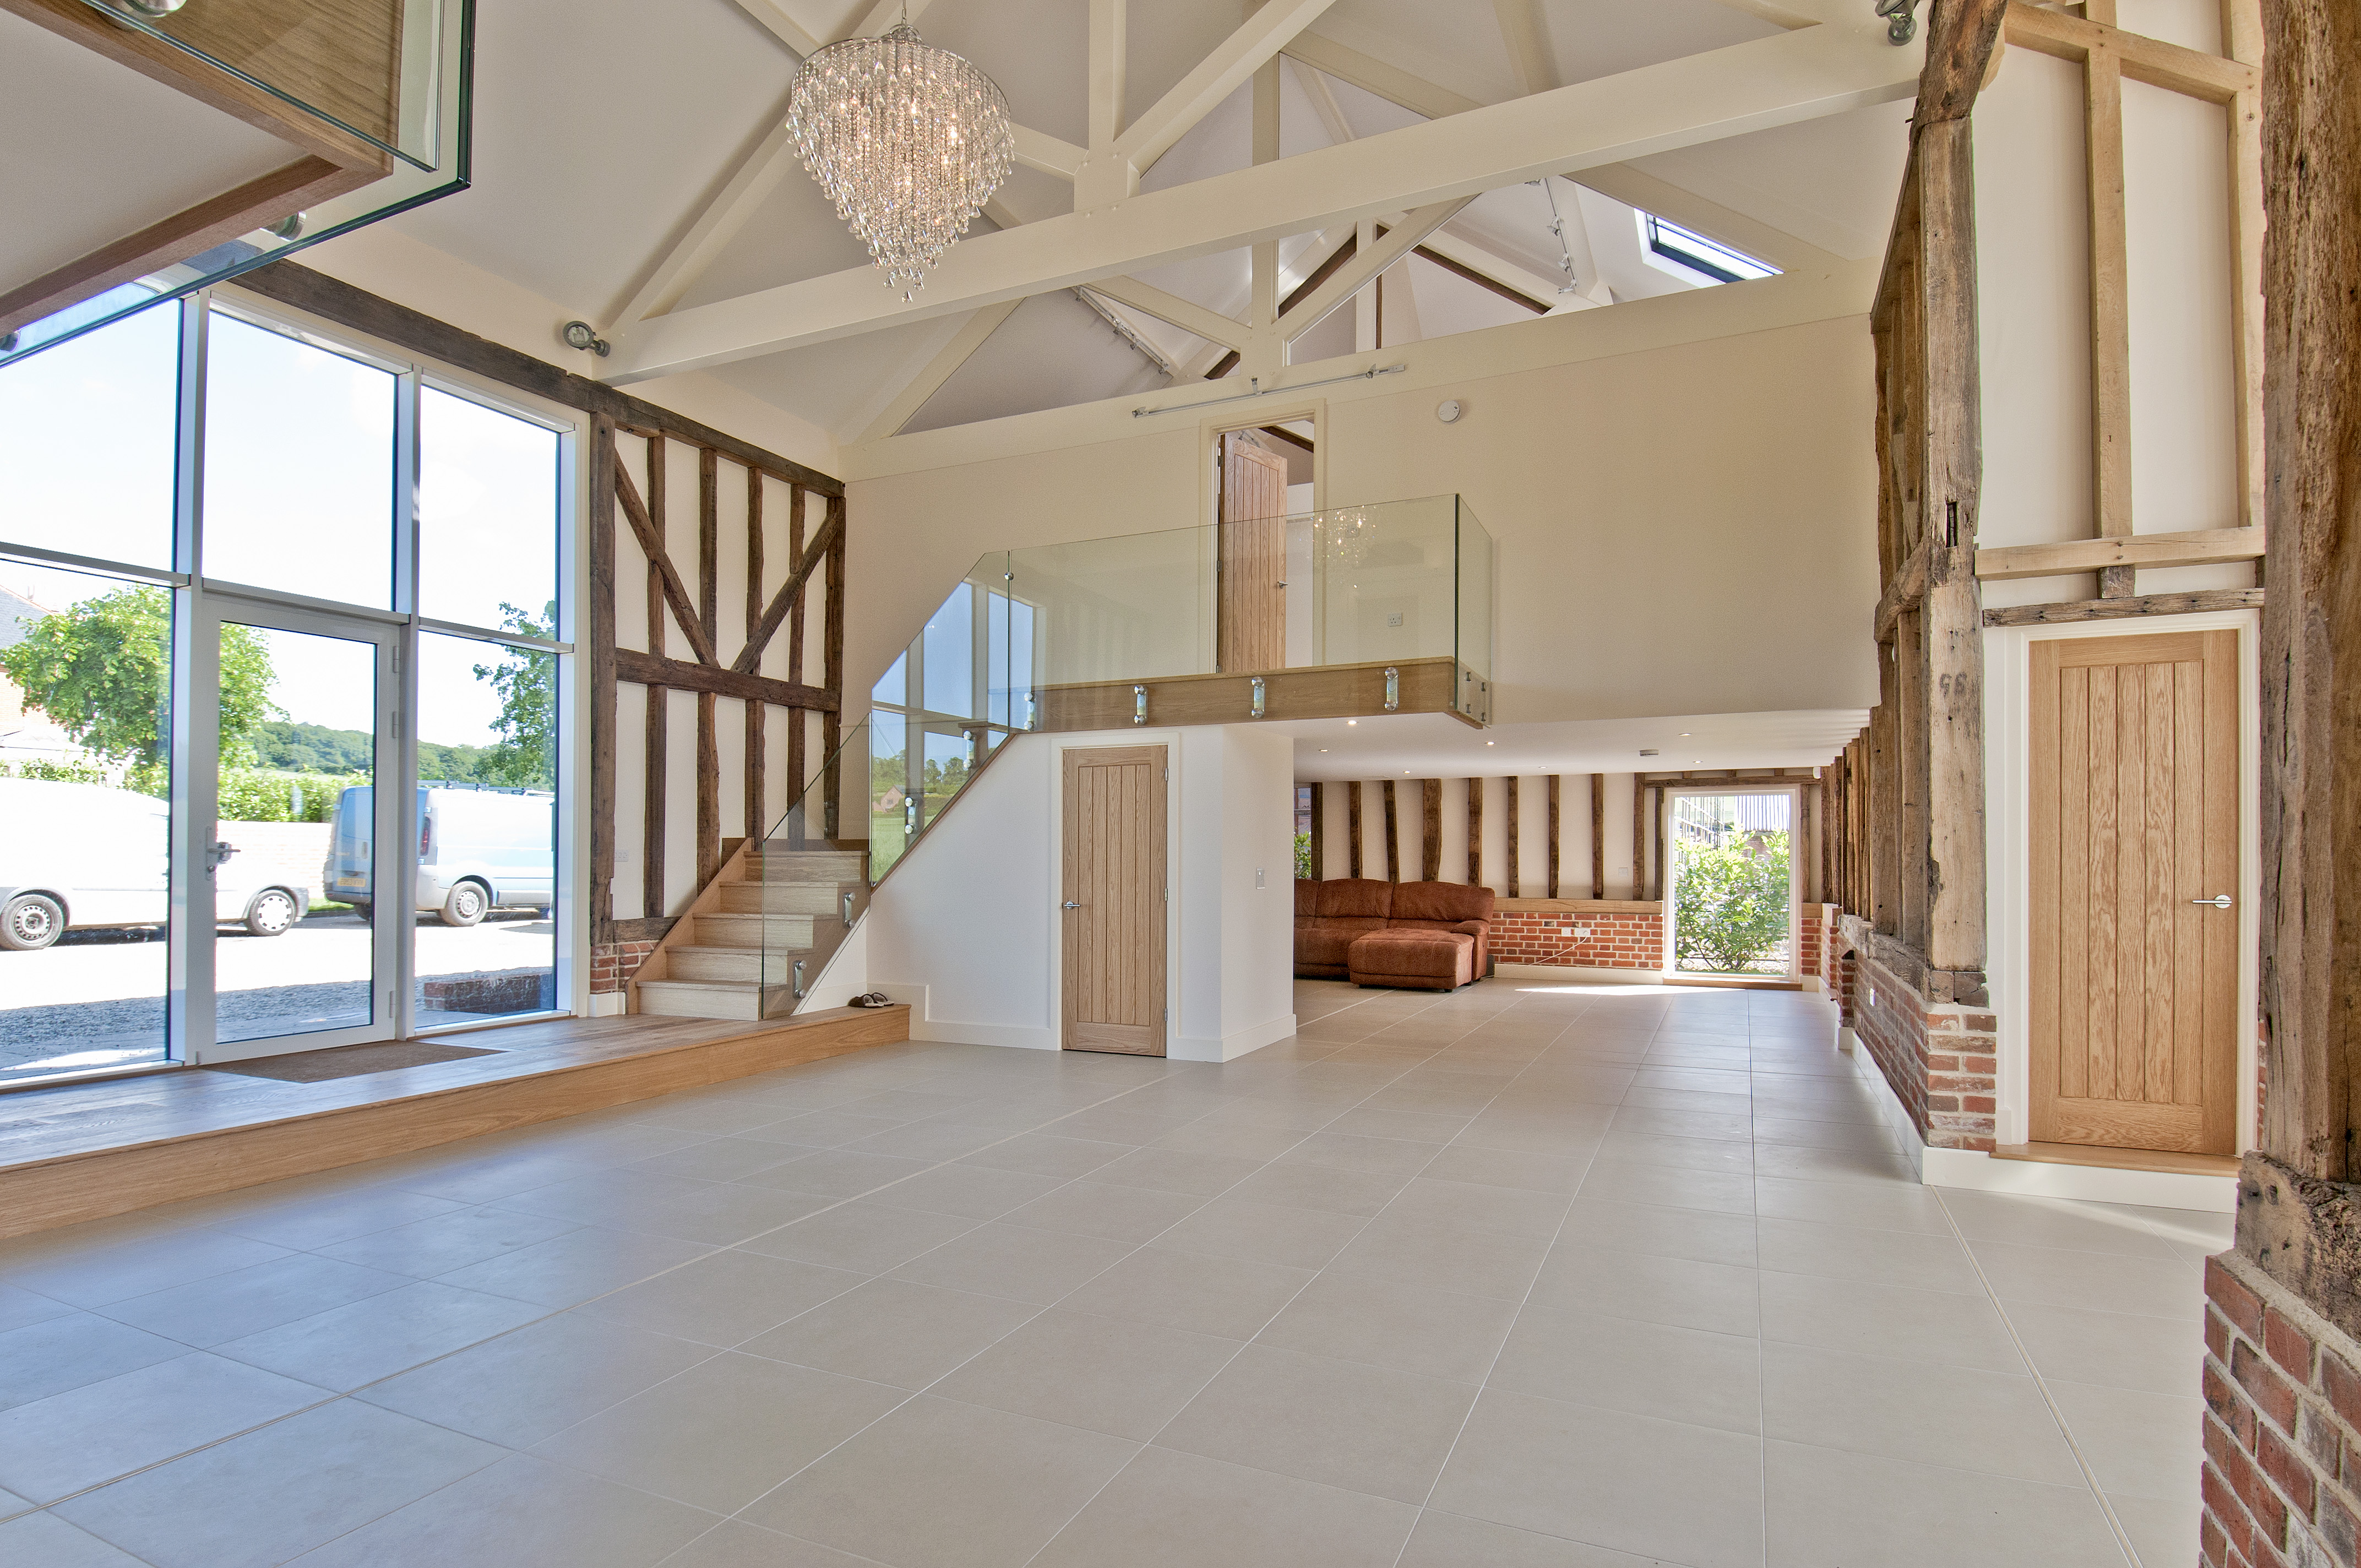 </p> <p>Find your ideal home design pro on designfor-me.com - get matched and see who's interested in your home project. Click image to see more inspiration from our design pros</p> <p>Design by Stuart, architect from Leeds, Yorkshire and The Humber</p> <p>#architecture #homedesign #modernhomes #homeinspiration #kitchens #kitchendesign #kitcheninspiration #kitchenideas #kitchengoals #extensions #extensiondesign #extensioninspiration #extensionideas #houseextension #glazing #architecturalglazing #naturallight #slidingdoors #doubleheightspace</p> <p>